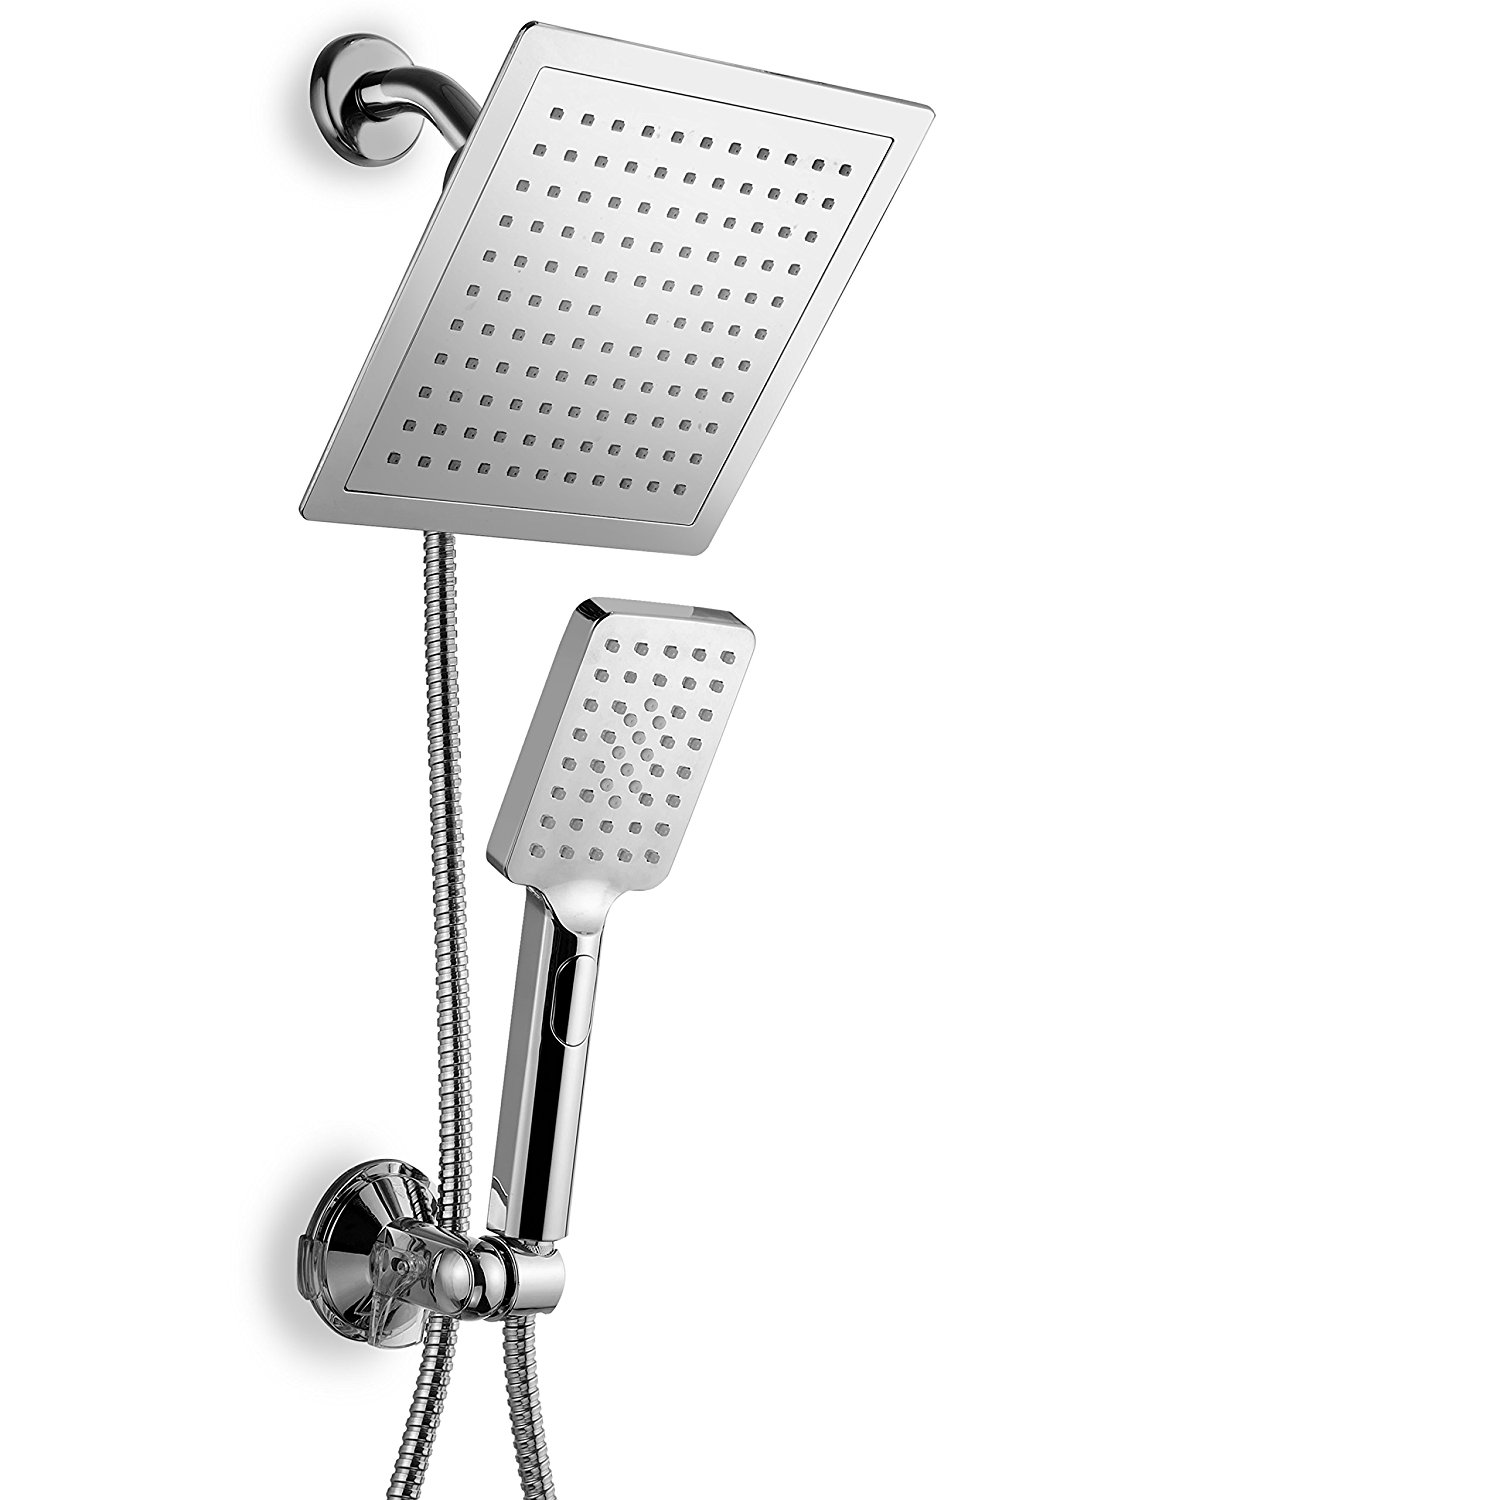 DreamSpa Ultra-Luxury 9" Rainfall Shower Head / Handheld Combo. Convenient Push-Button Flow Control Button for easy one-handed operation. Switch flow settings with the same hand! Premium Chrome